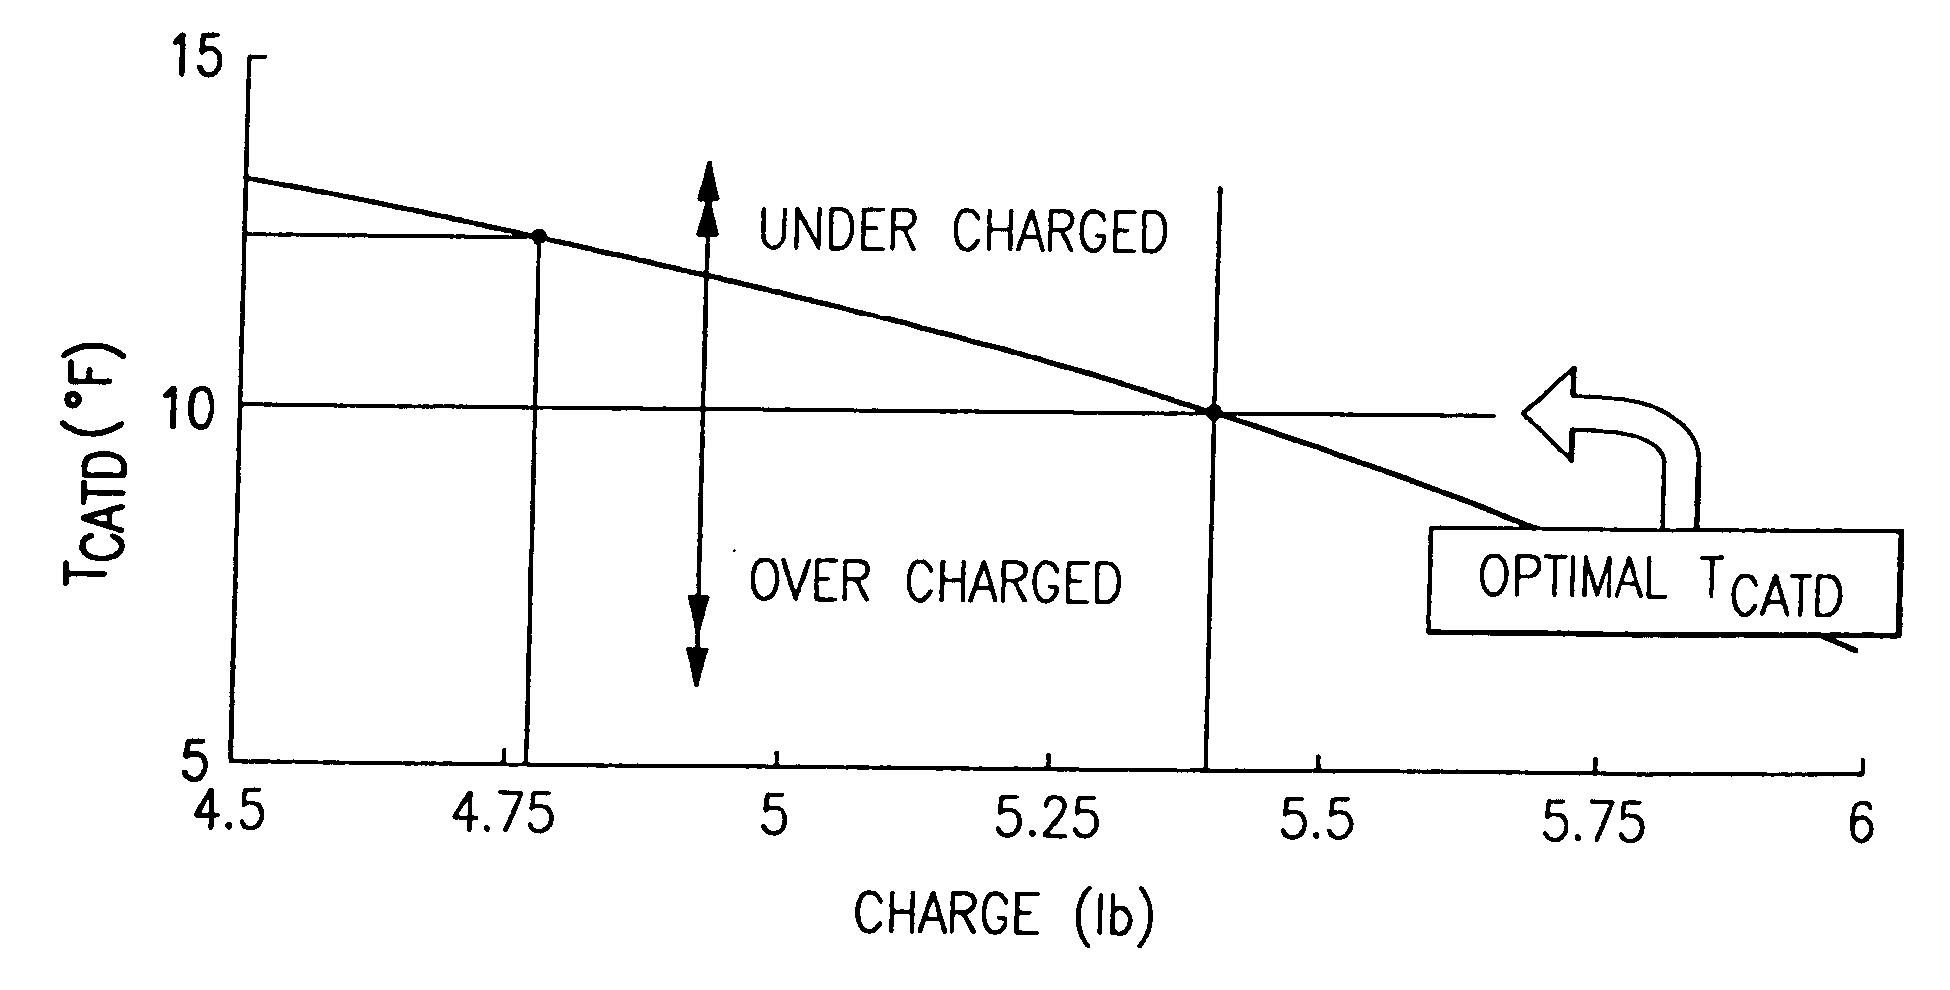 Visual display of temperature differences for refrigerant charge indication